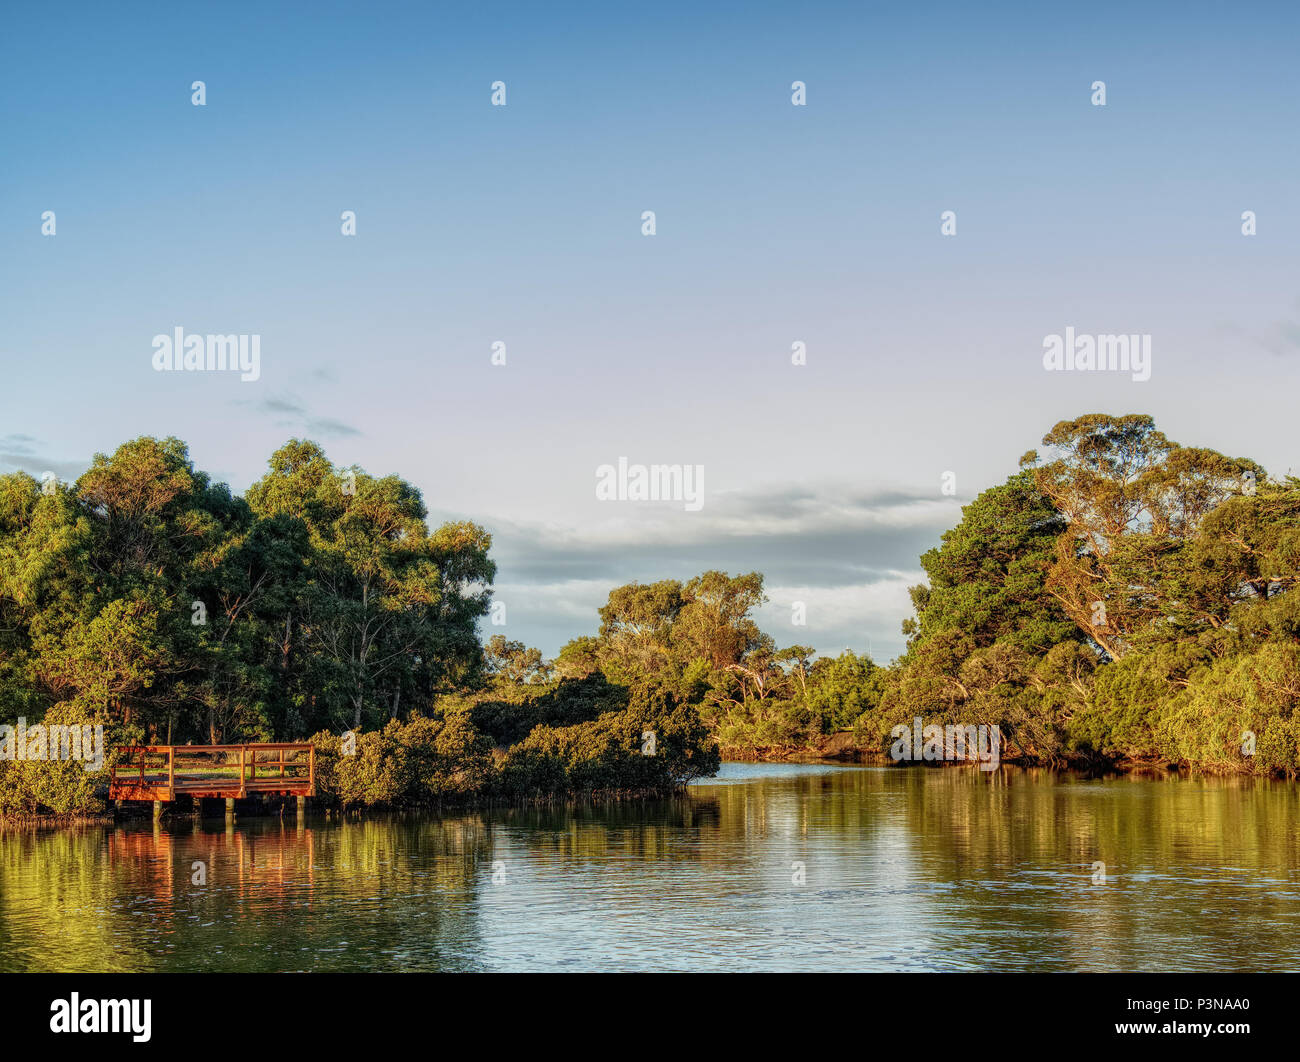 Water scene at Tooradin Australia in late afternoon Stock Photo